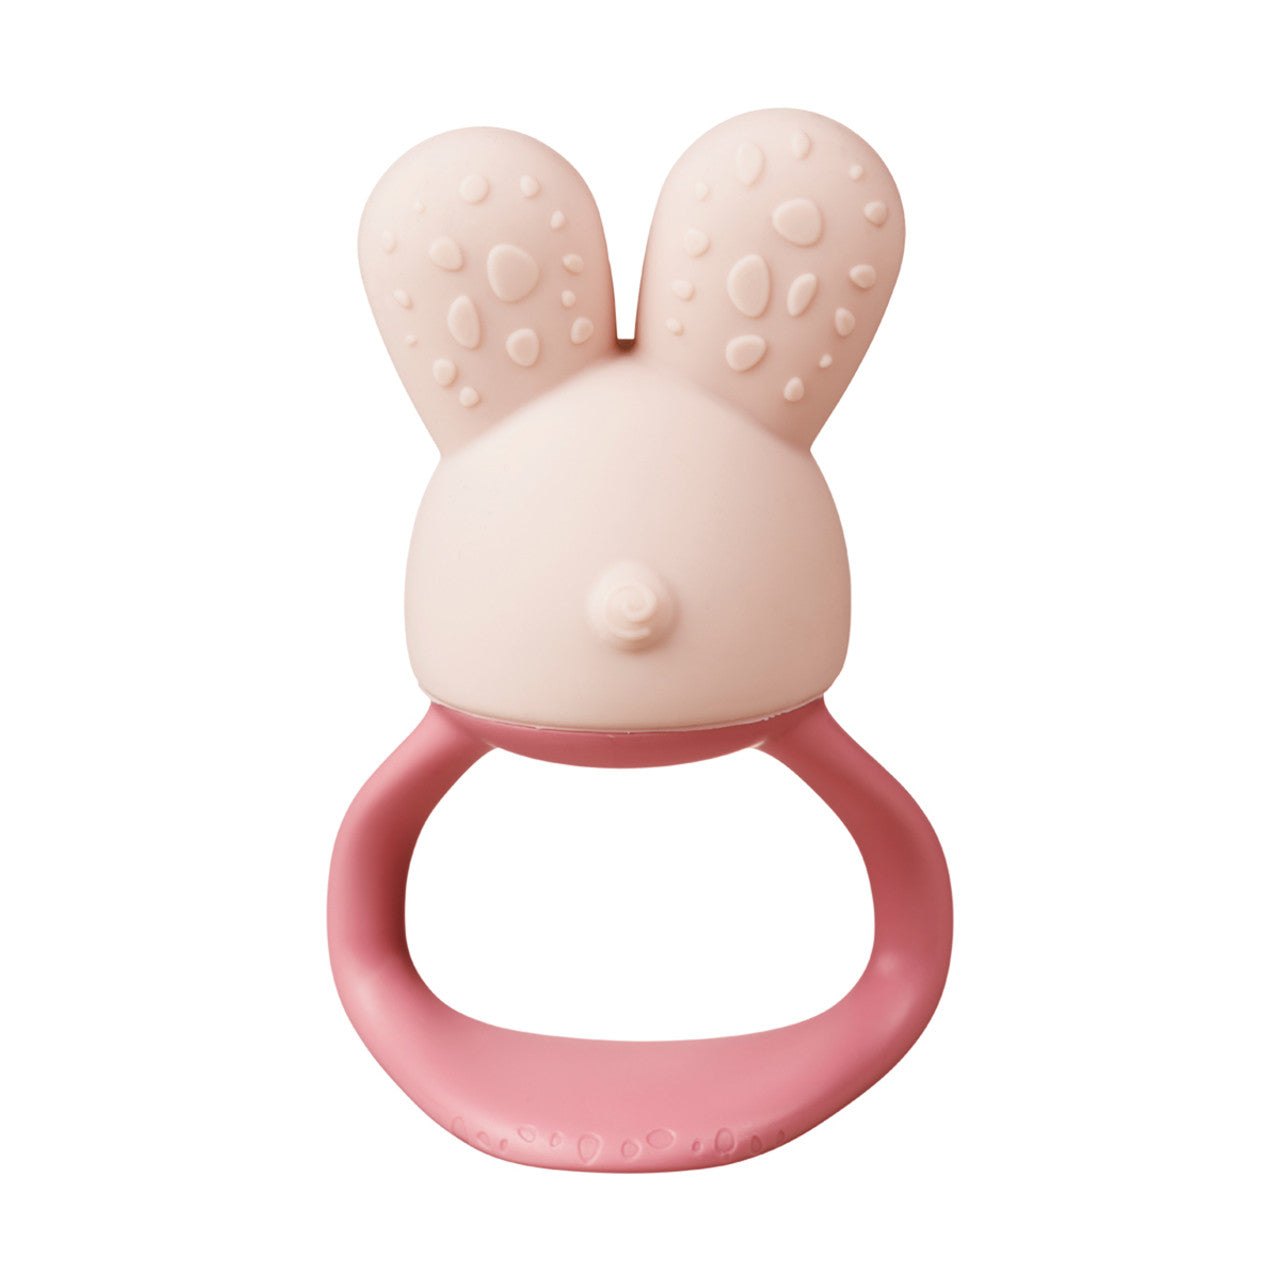 b.box Chill + Fill Silicone Teether available at Bear & Moo